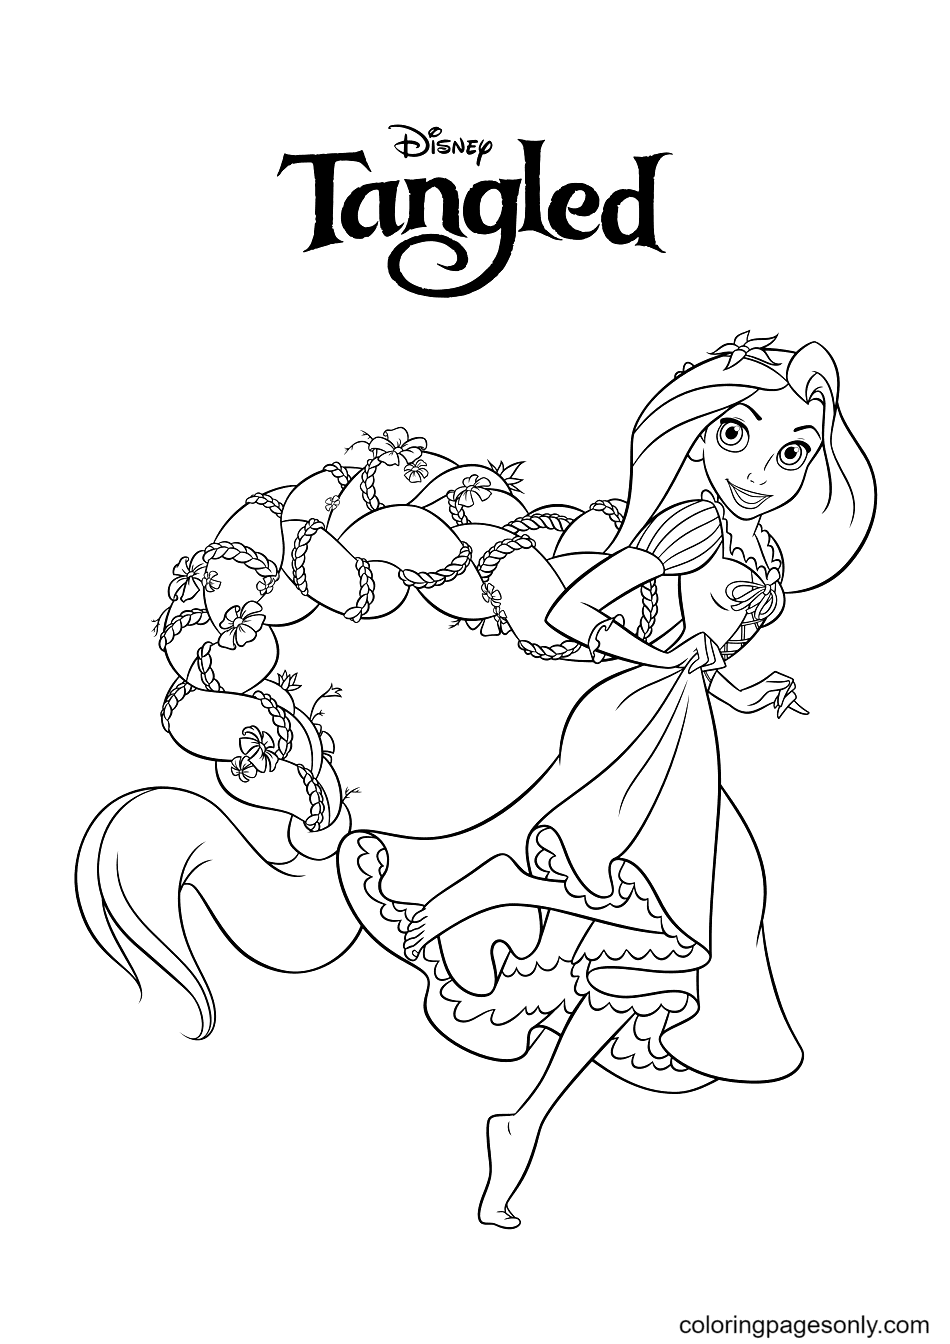 Tangled Coloring Pages   Coloring Pages For Kids And Adults